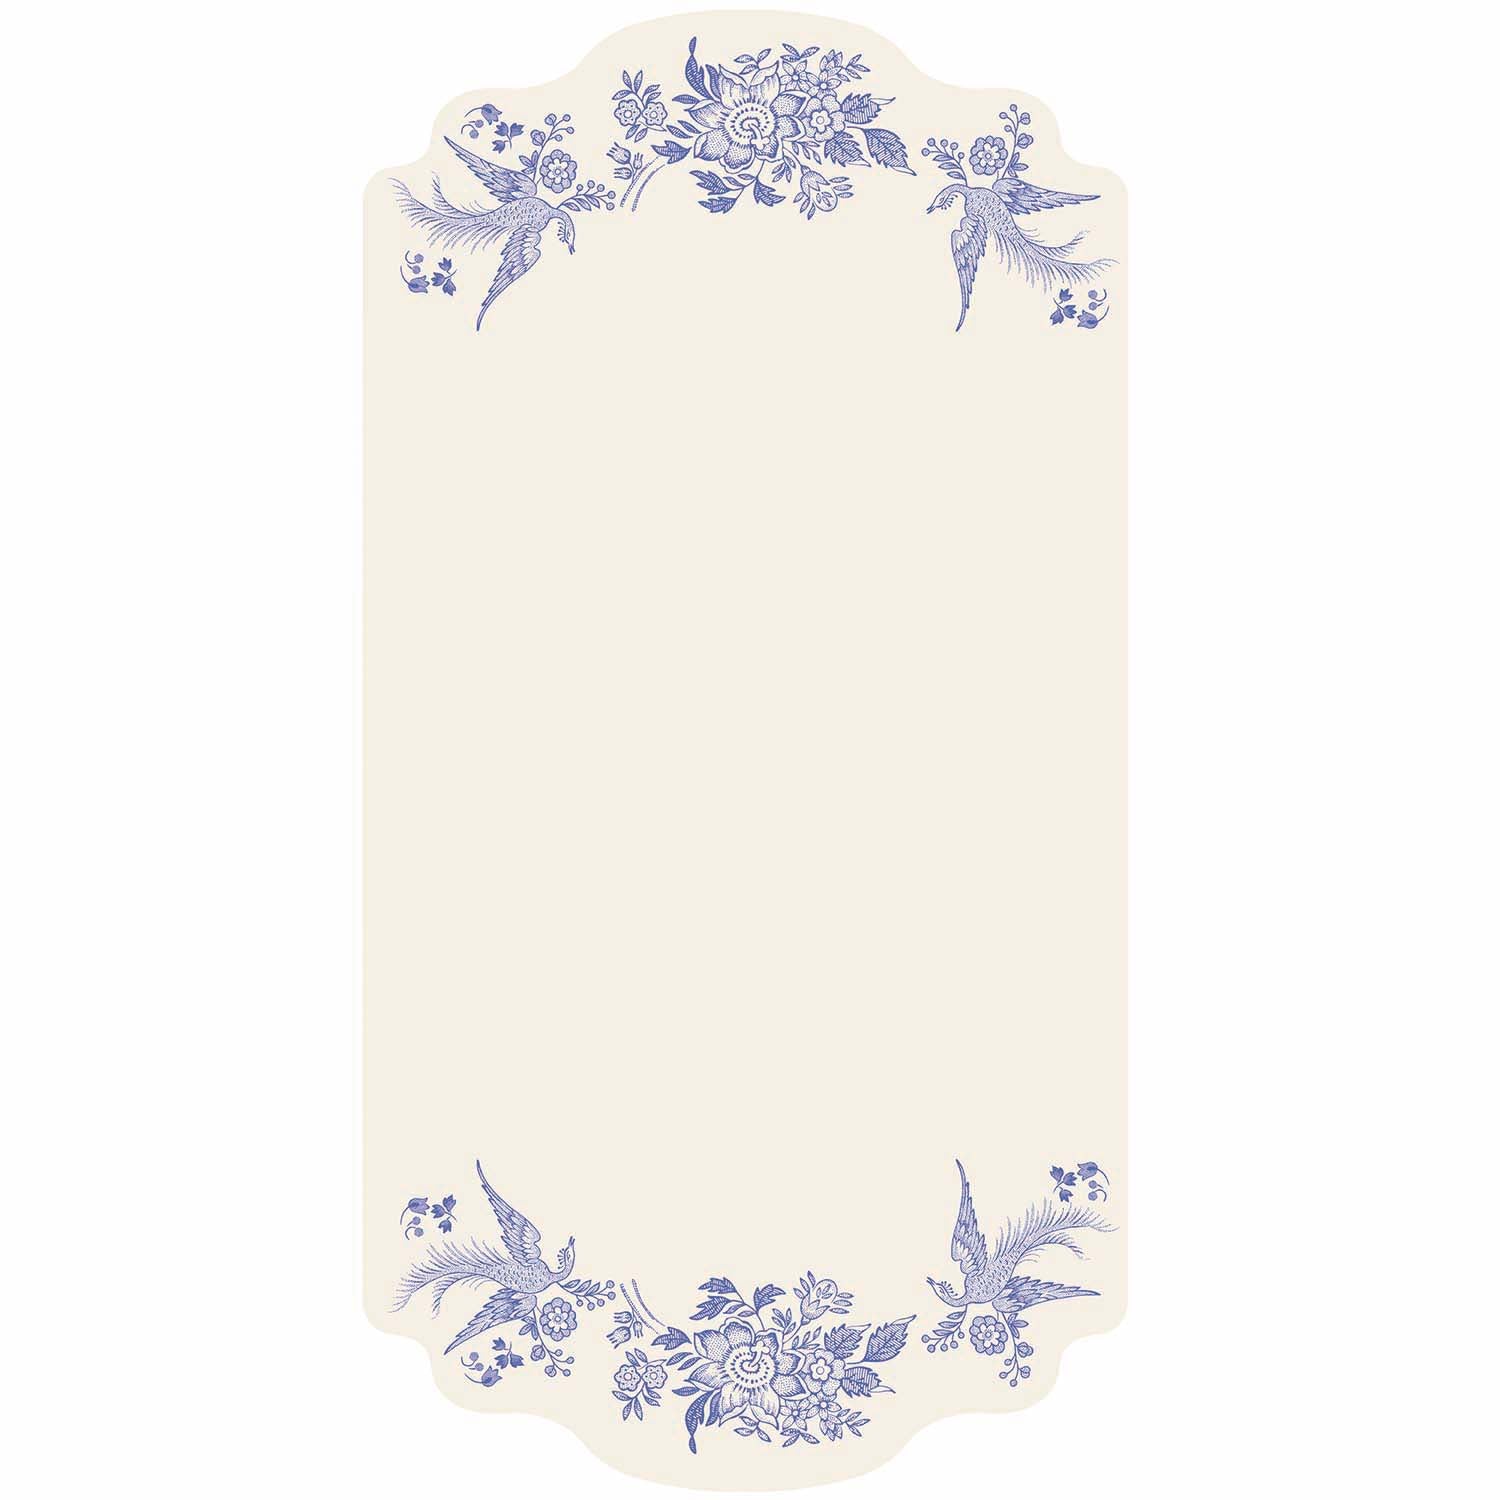 A Hester &amp; Cook Blue Asiatic Pheasants Table Card with a floral design.